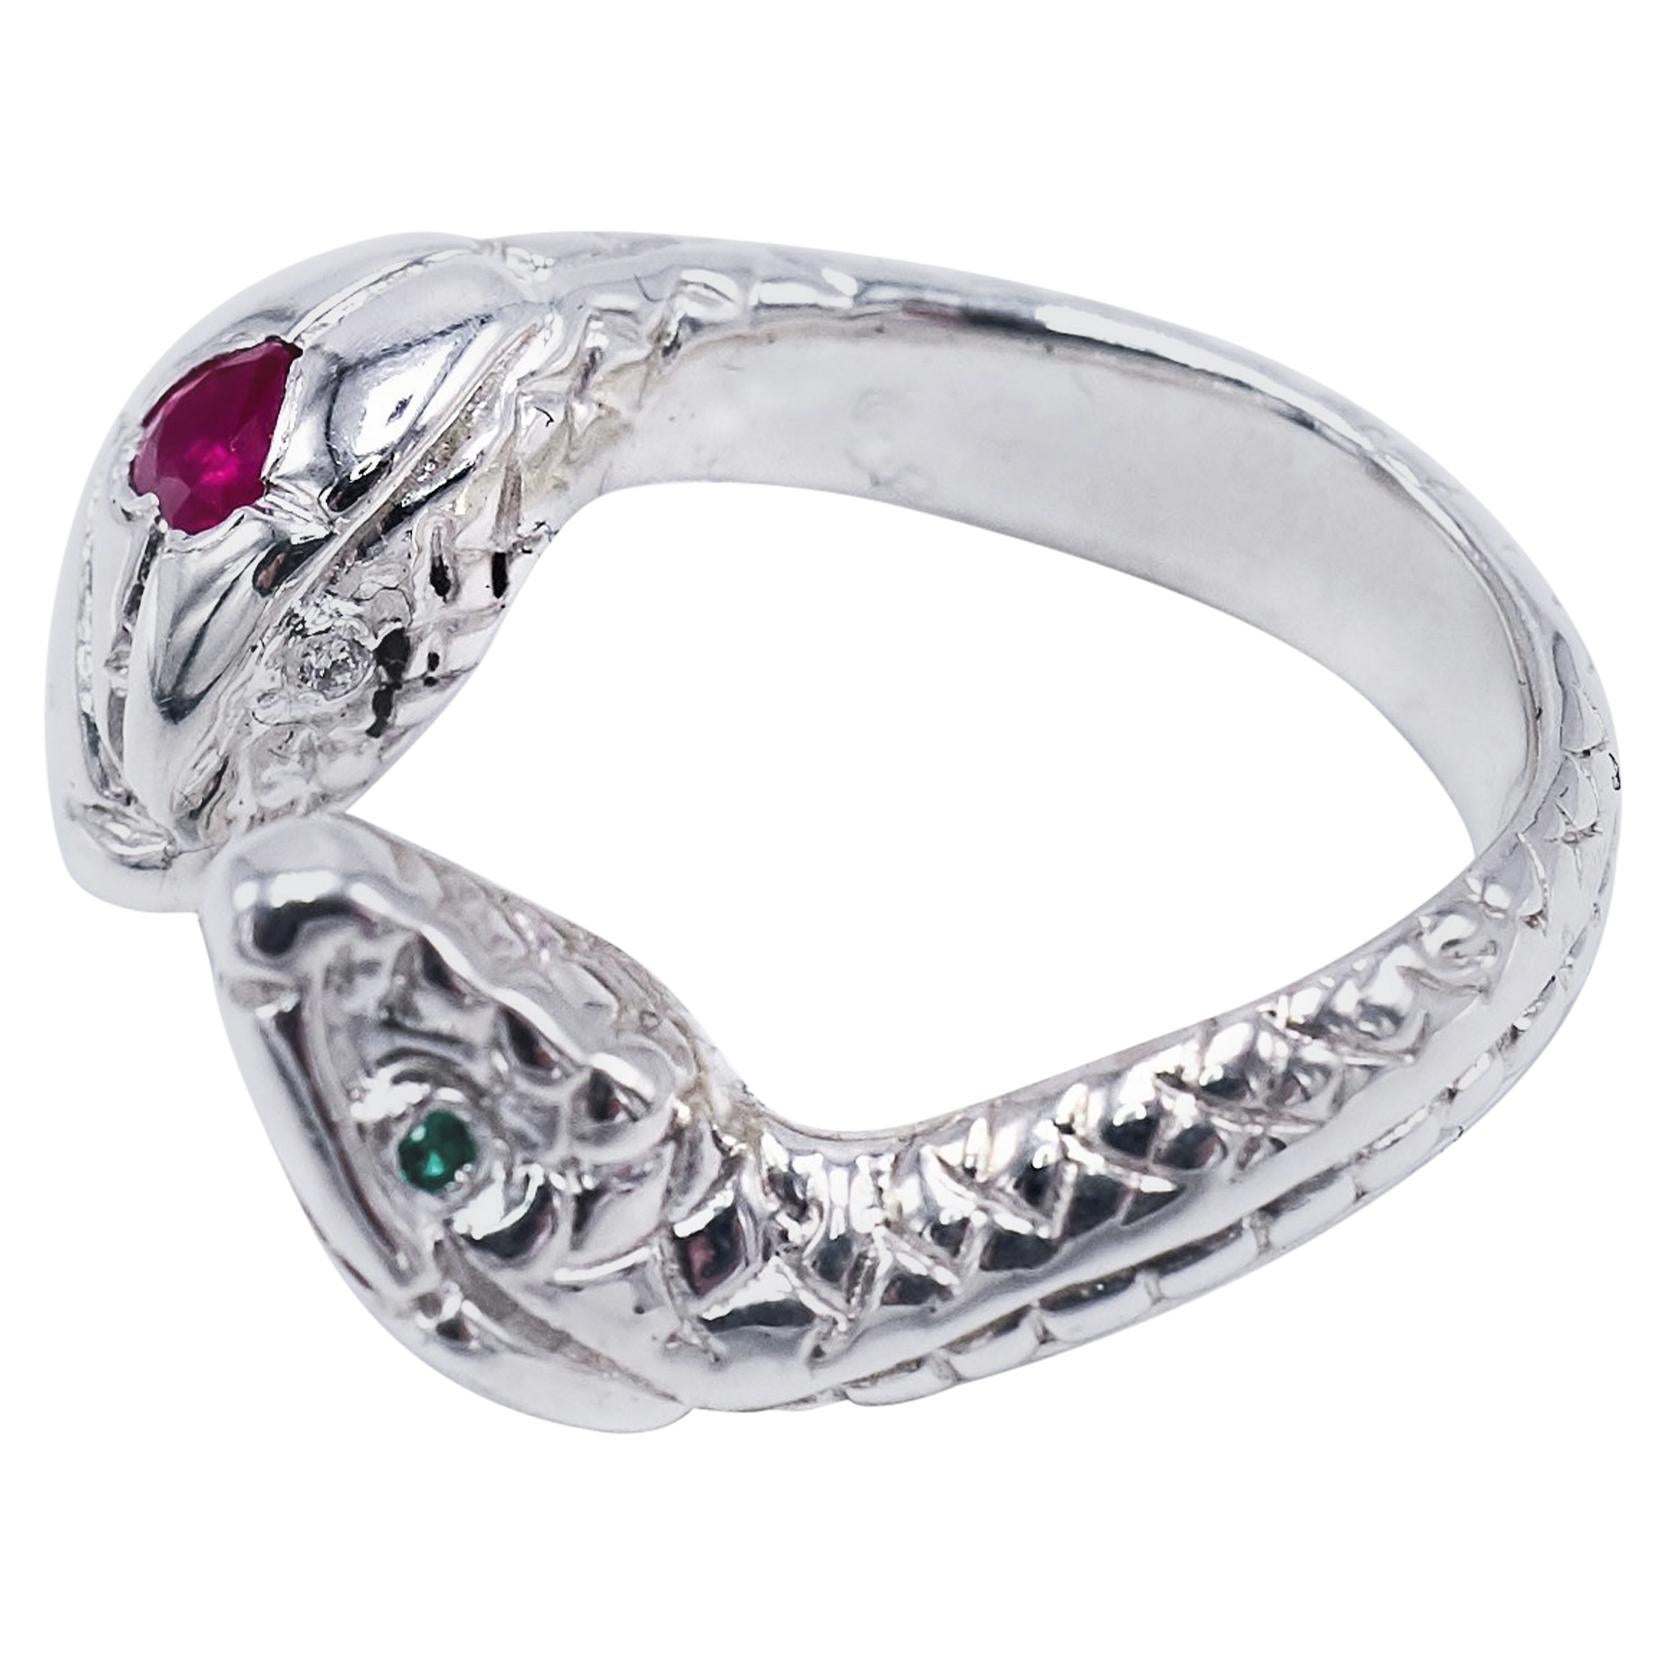 White Diamond Emerald Heart Ruby Snake Ring Silver Cocktail Ring J Dauphin